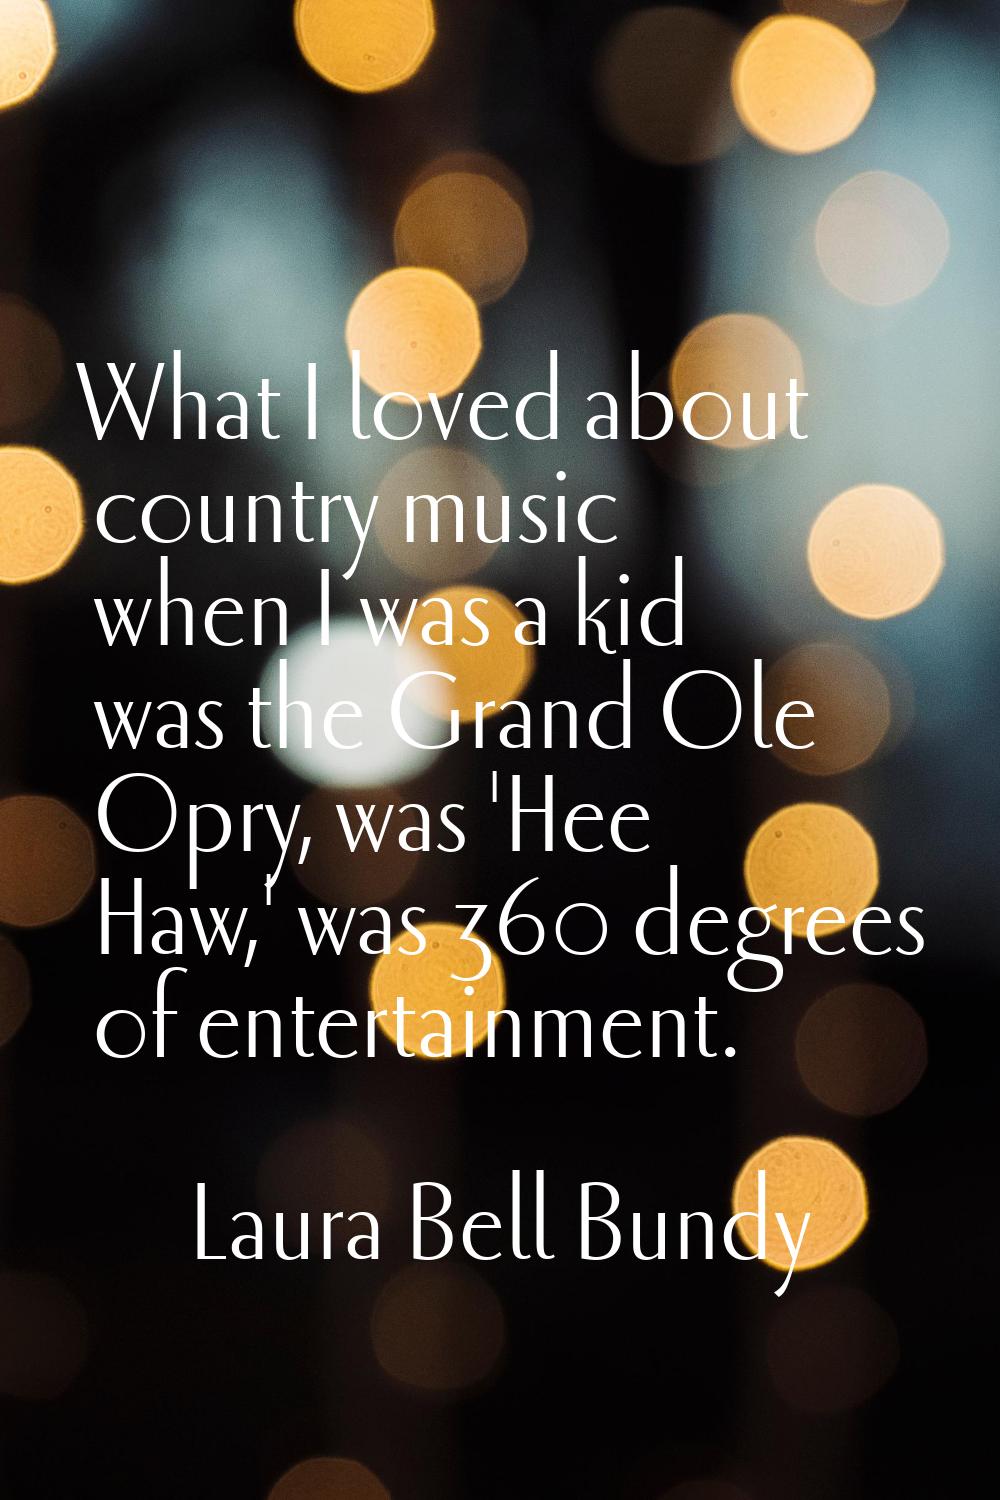 What I loved about country music when I was a kid was the Grand Ole Opry, was 'Hee Haw,' was 360 de